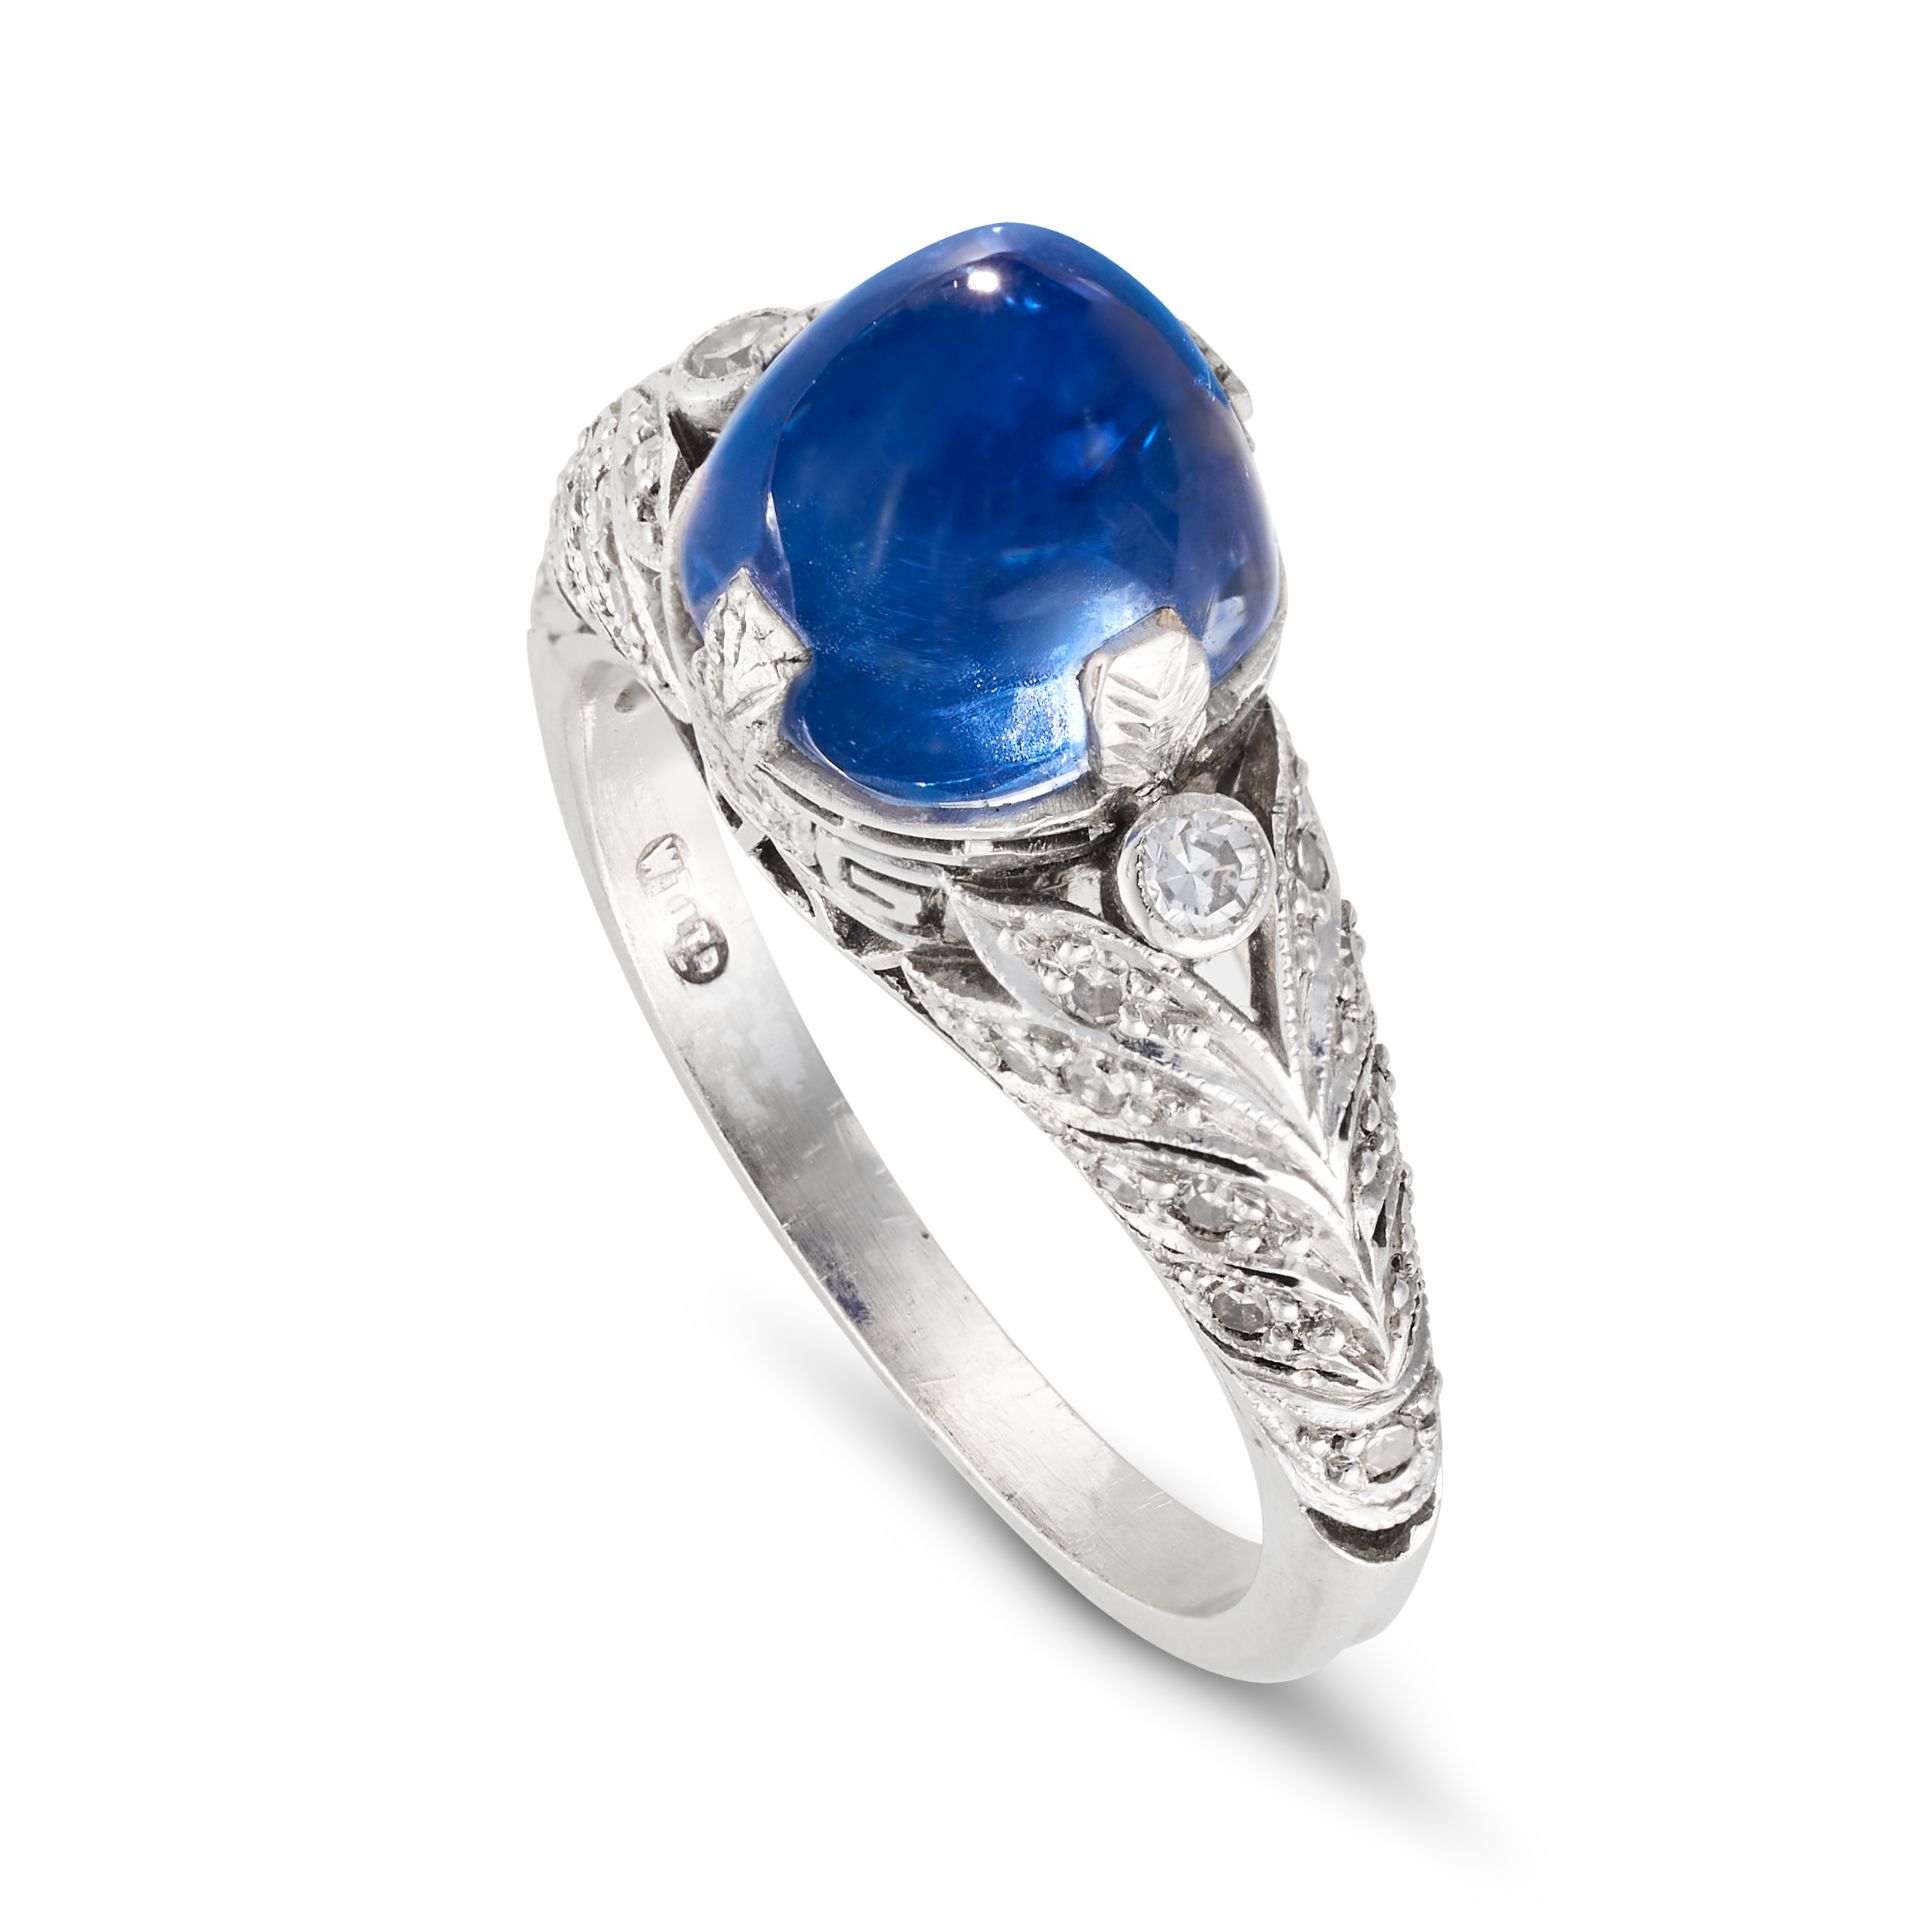 AN ART DECO KASHMIR SAPPHIRE AND DIAMOND RING in platinum, set with a sugarloaf cabochon sapphire... - Image 2 of 3